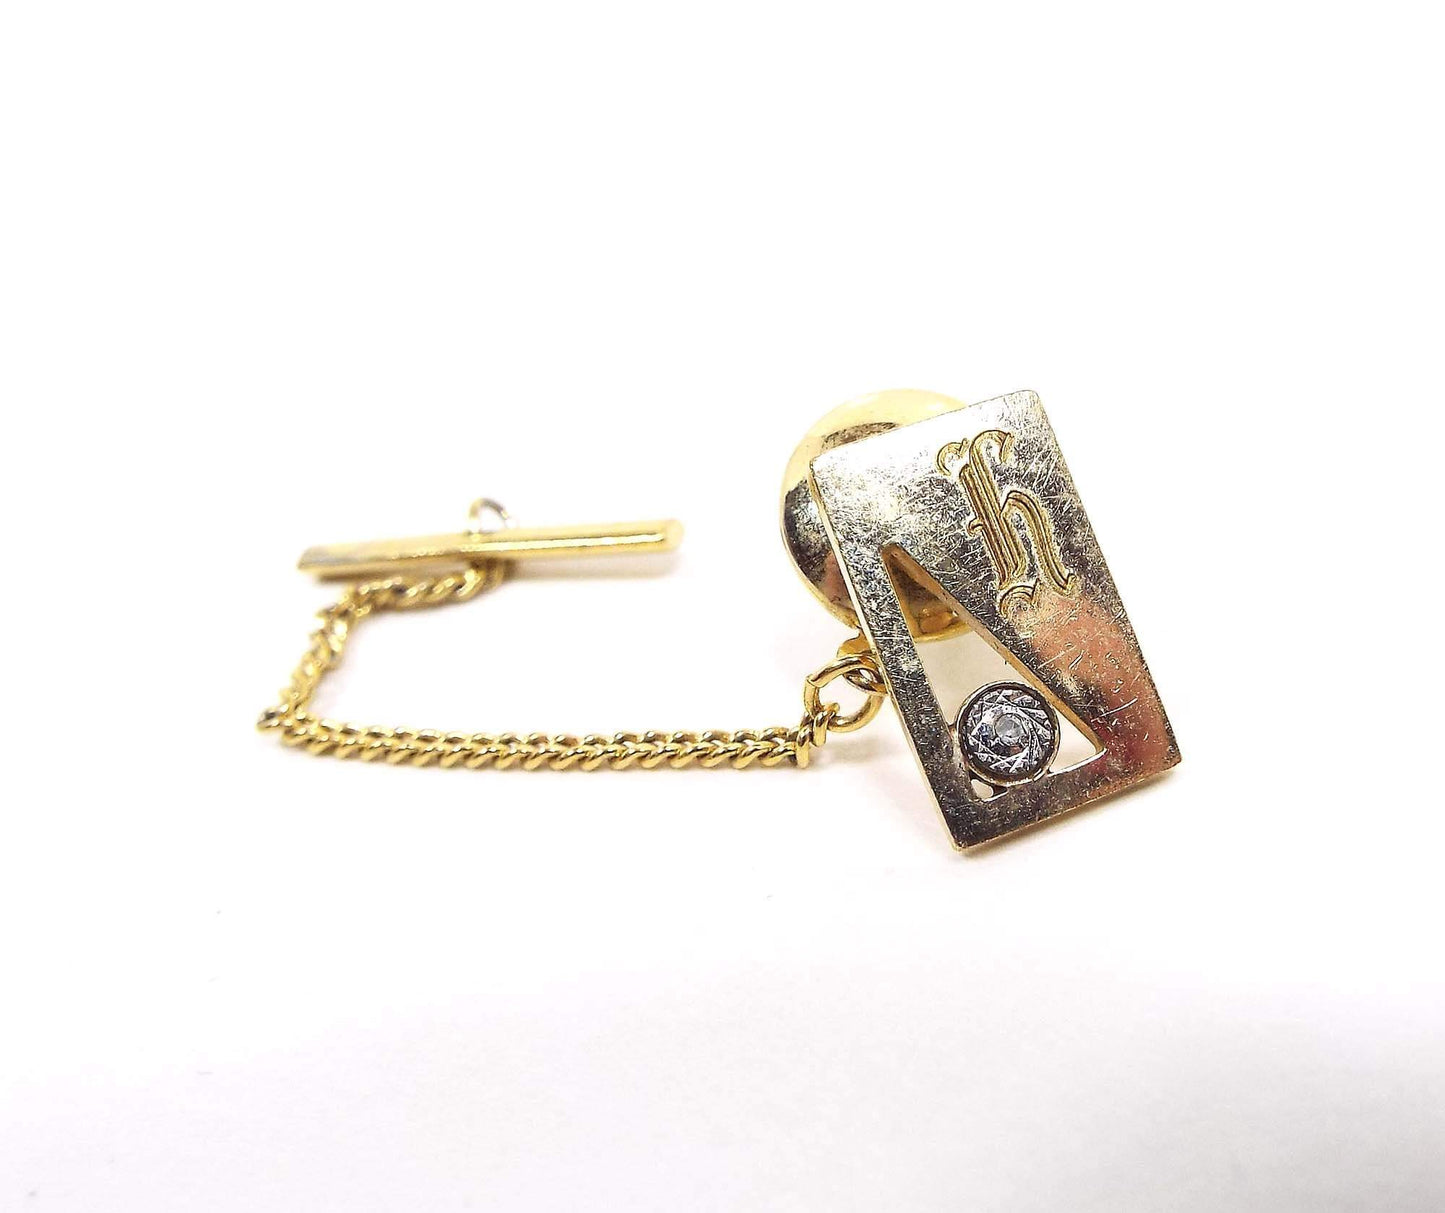 PLA Gold Filled Letter Initial H Vintage Tie Tack with Tiny Diamond Chip, 14K GF Tie Pin